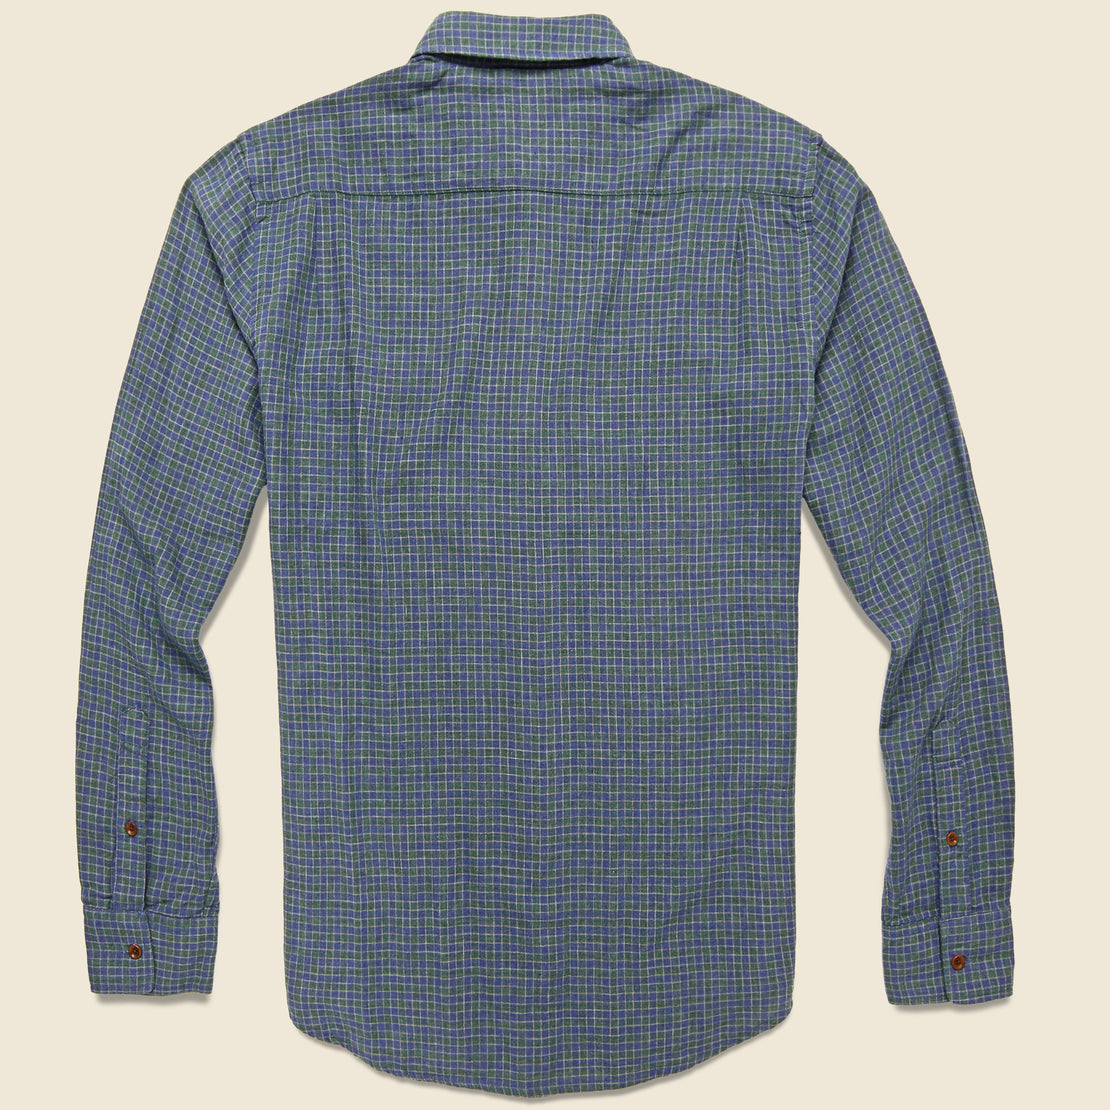 Doublecloth Pacific Shirt - Hunter Shadow Check - Faherty - STAG Provisions - Tops - L/S Woven - Plaid